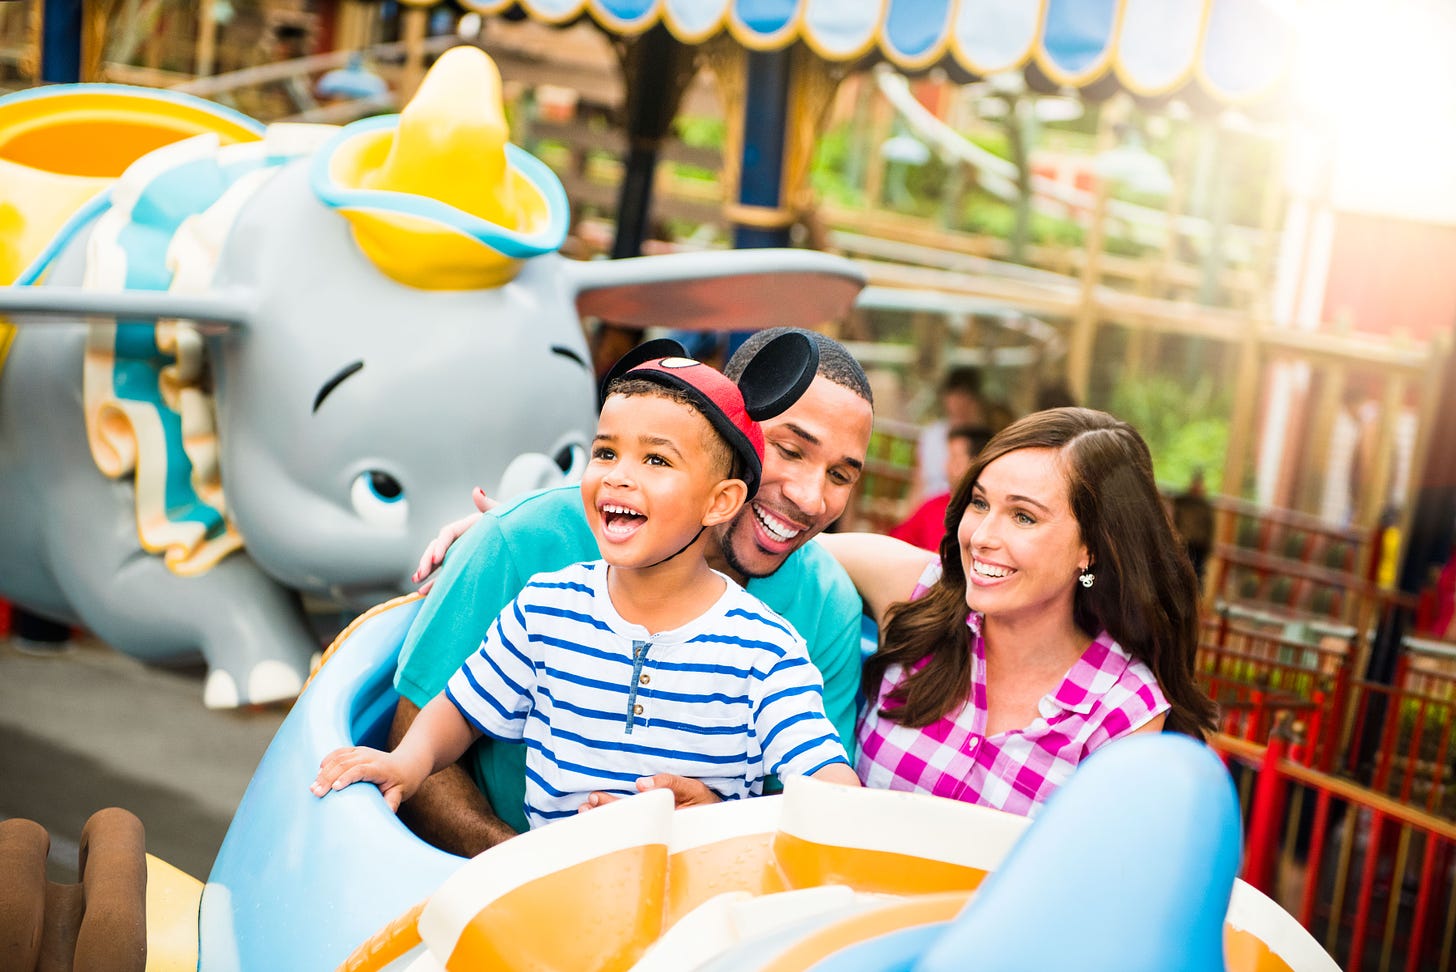 Amusement Parks in Florida | Experience Kissimmee